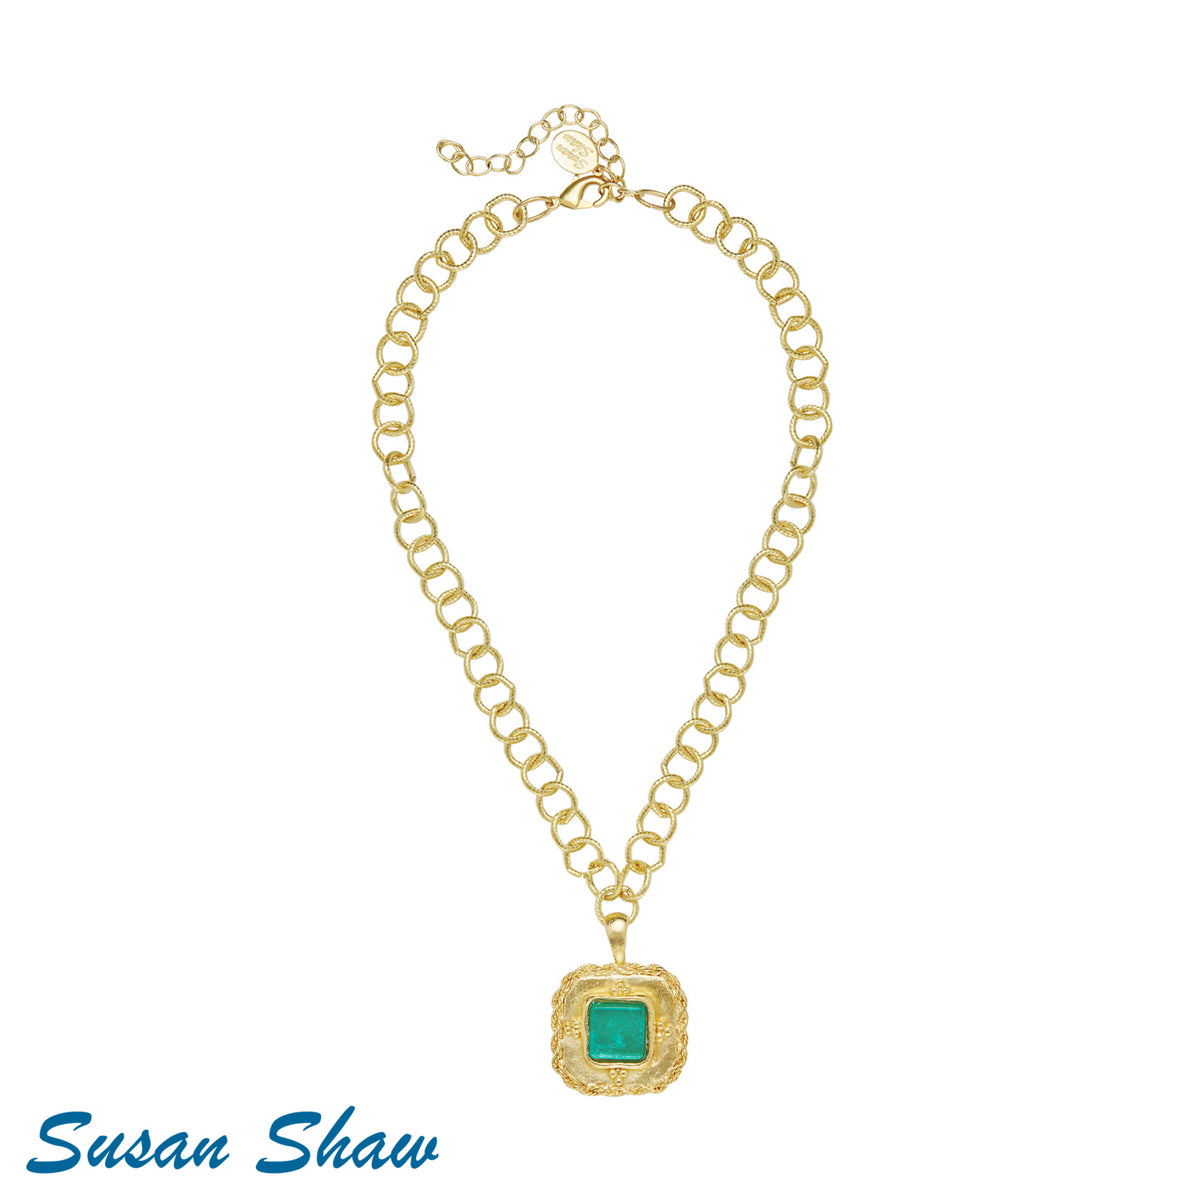 Teal French Glass on Gold Chain Necklace